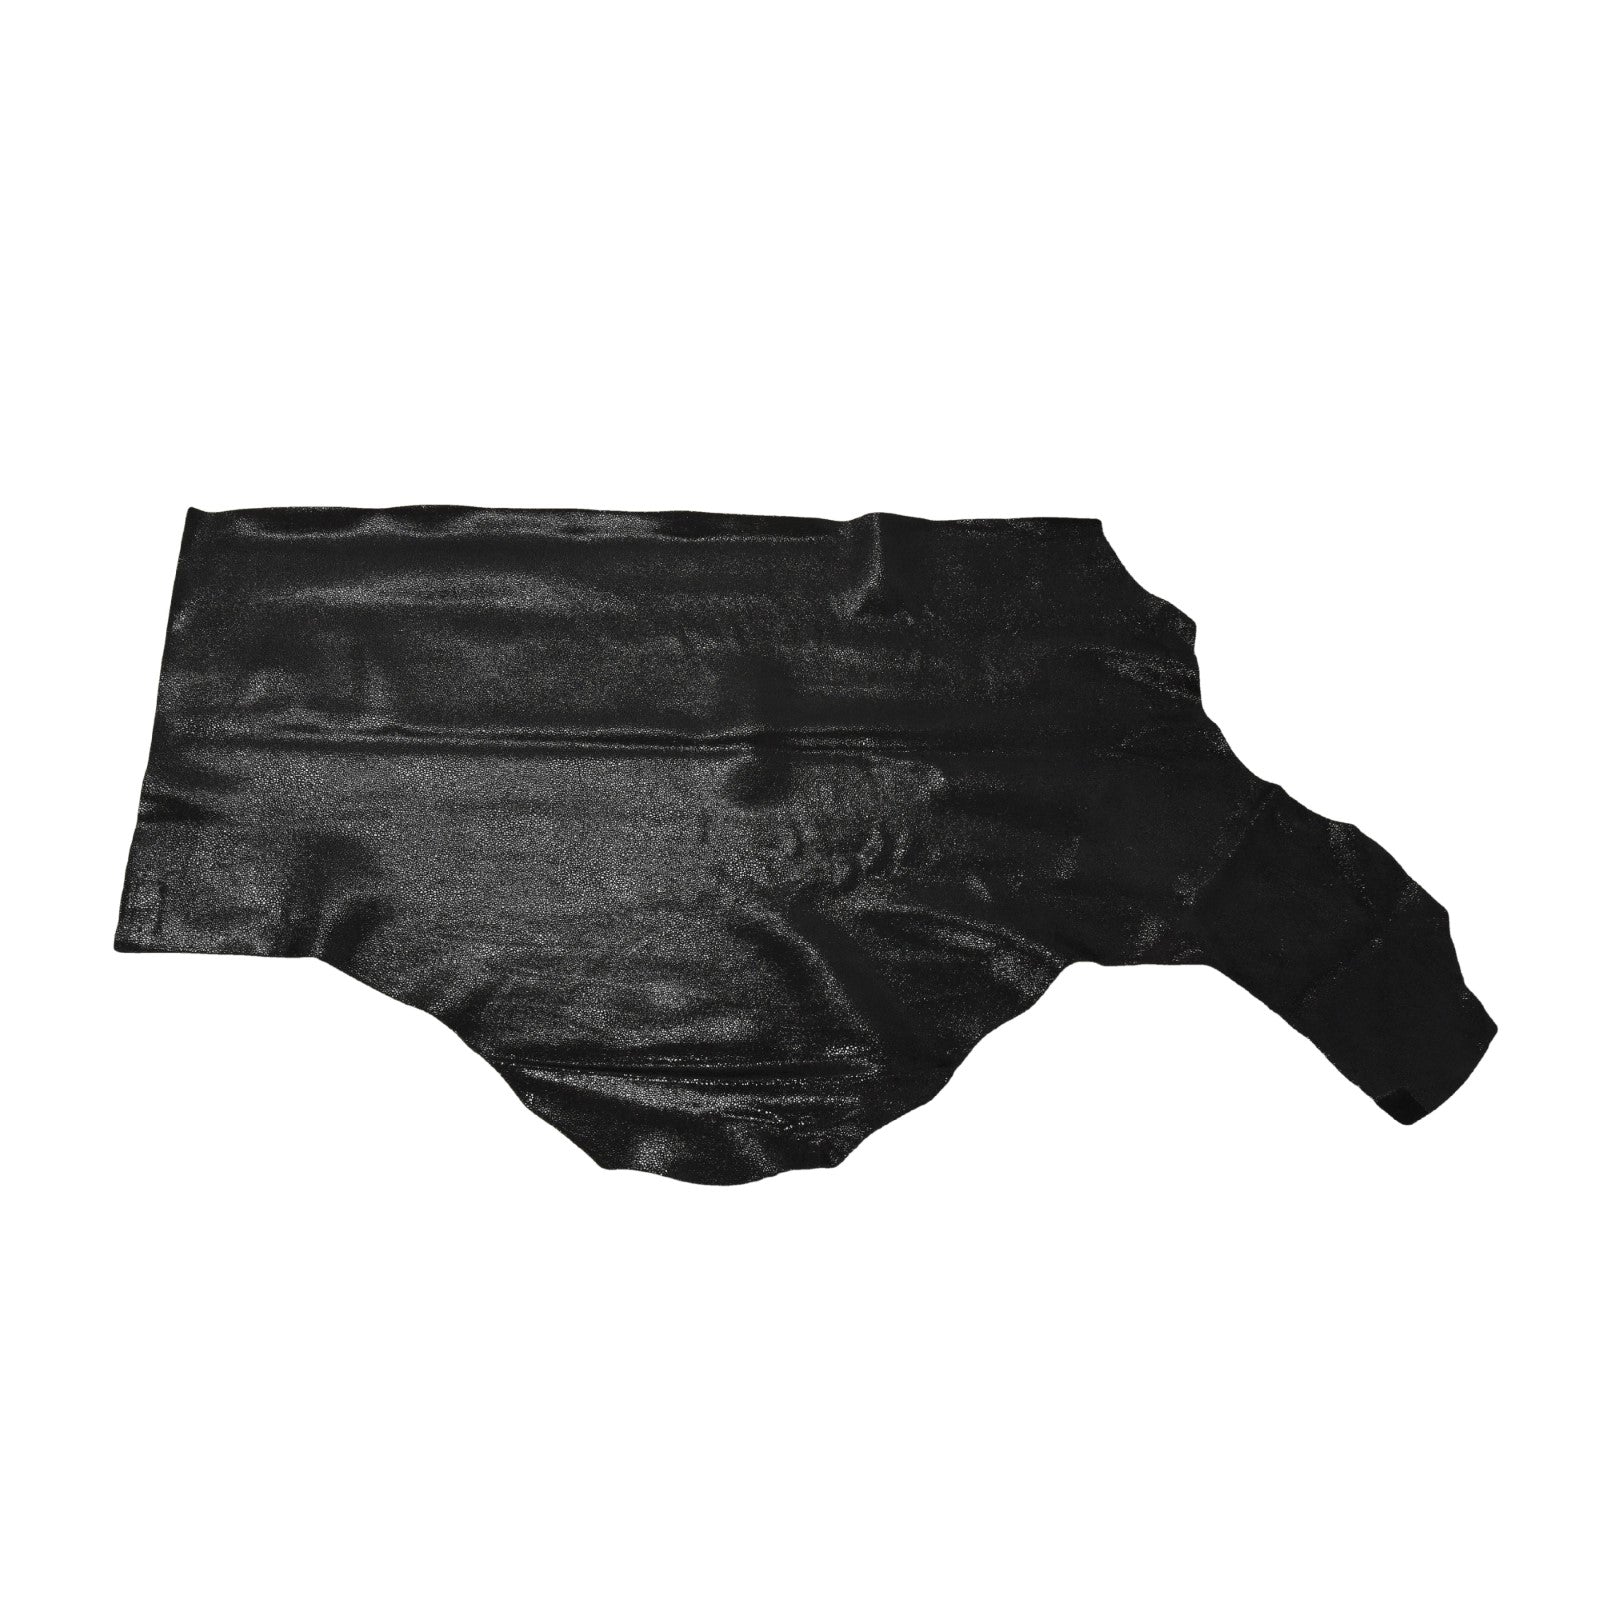 Metallic Black Sizzling Stingray 2-3 oz Cow Hides, 6.5-7.5 Sq Ft / Project Piece (Bottom) | The Leather Guy